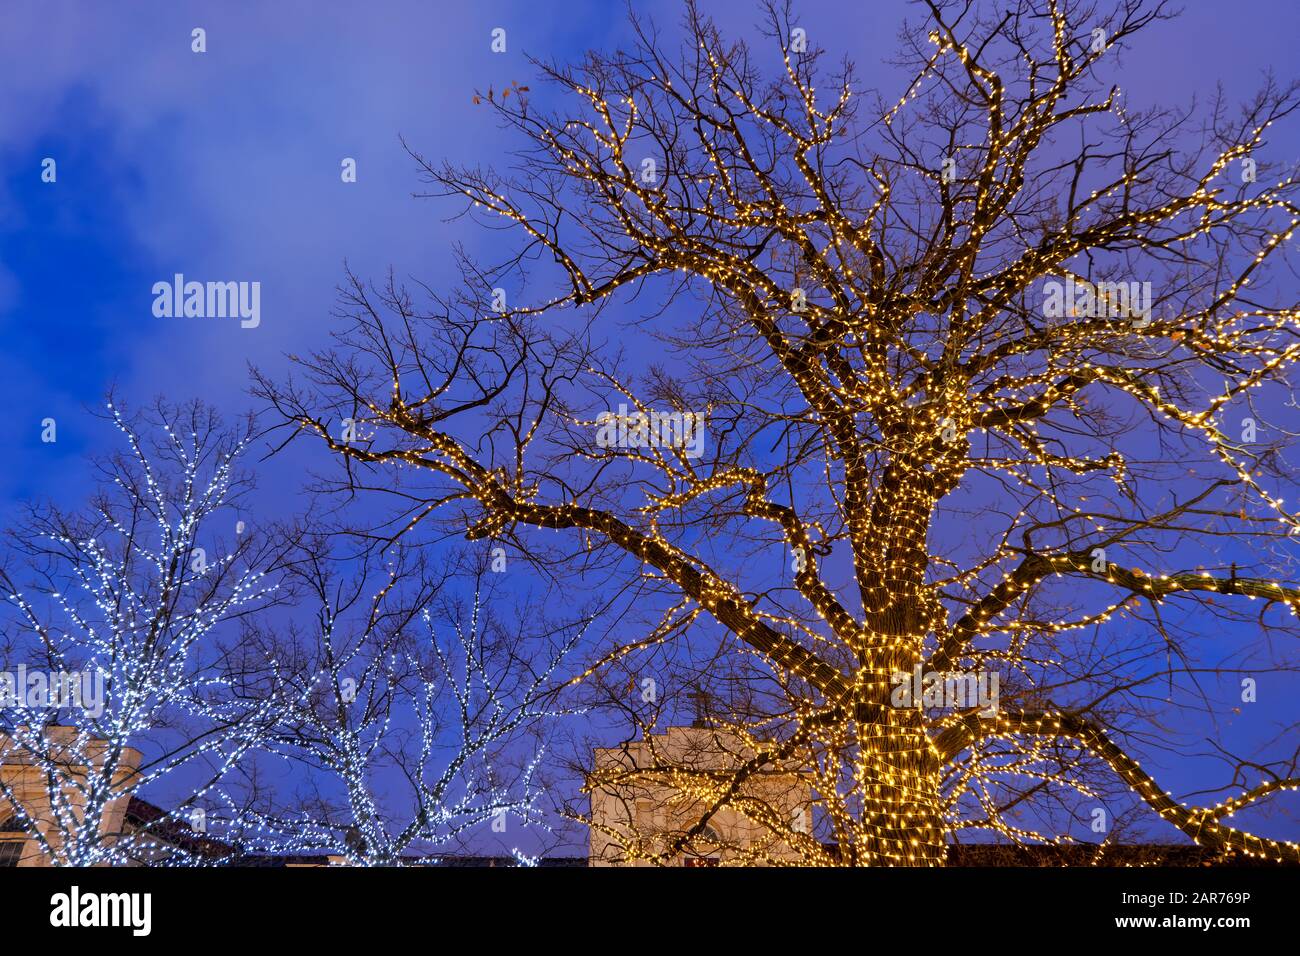 Illuminated trees covered with led lights in the evening, abstract city decoration during Christmas time Stock Photo